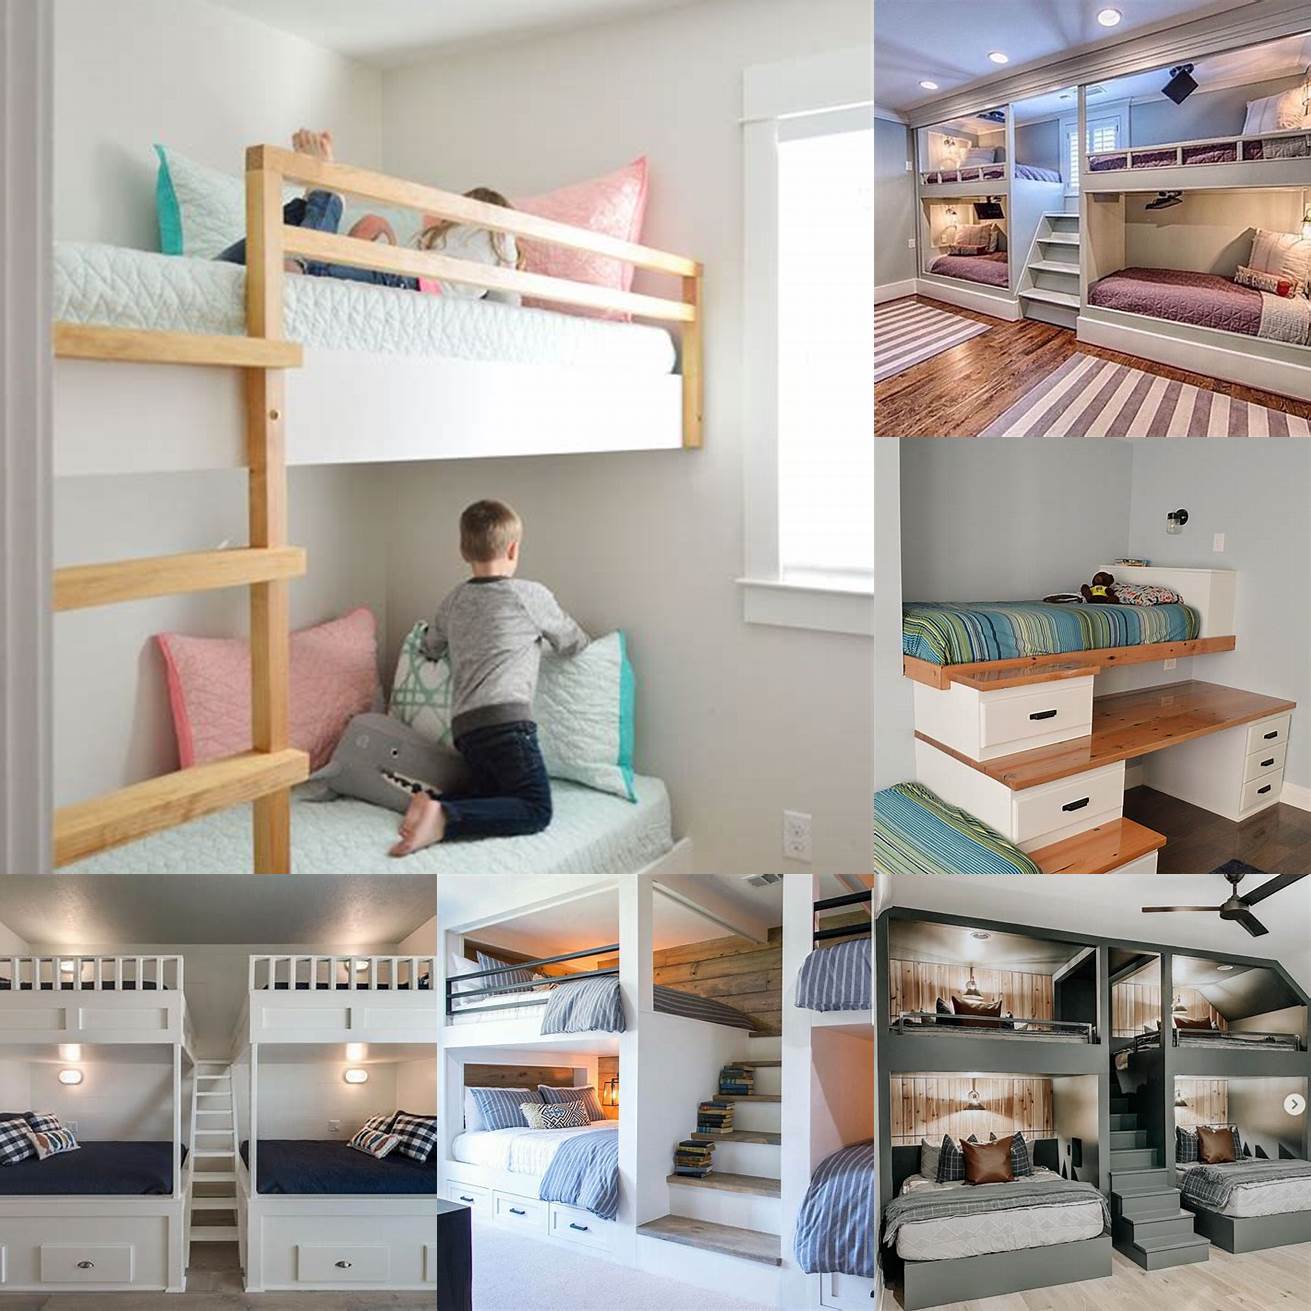 A bunk bed with built-in storage